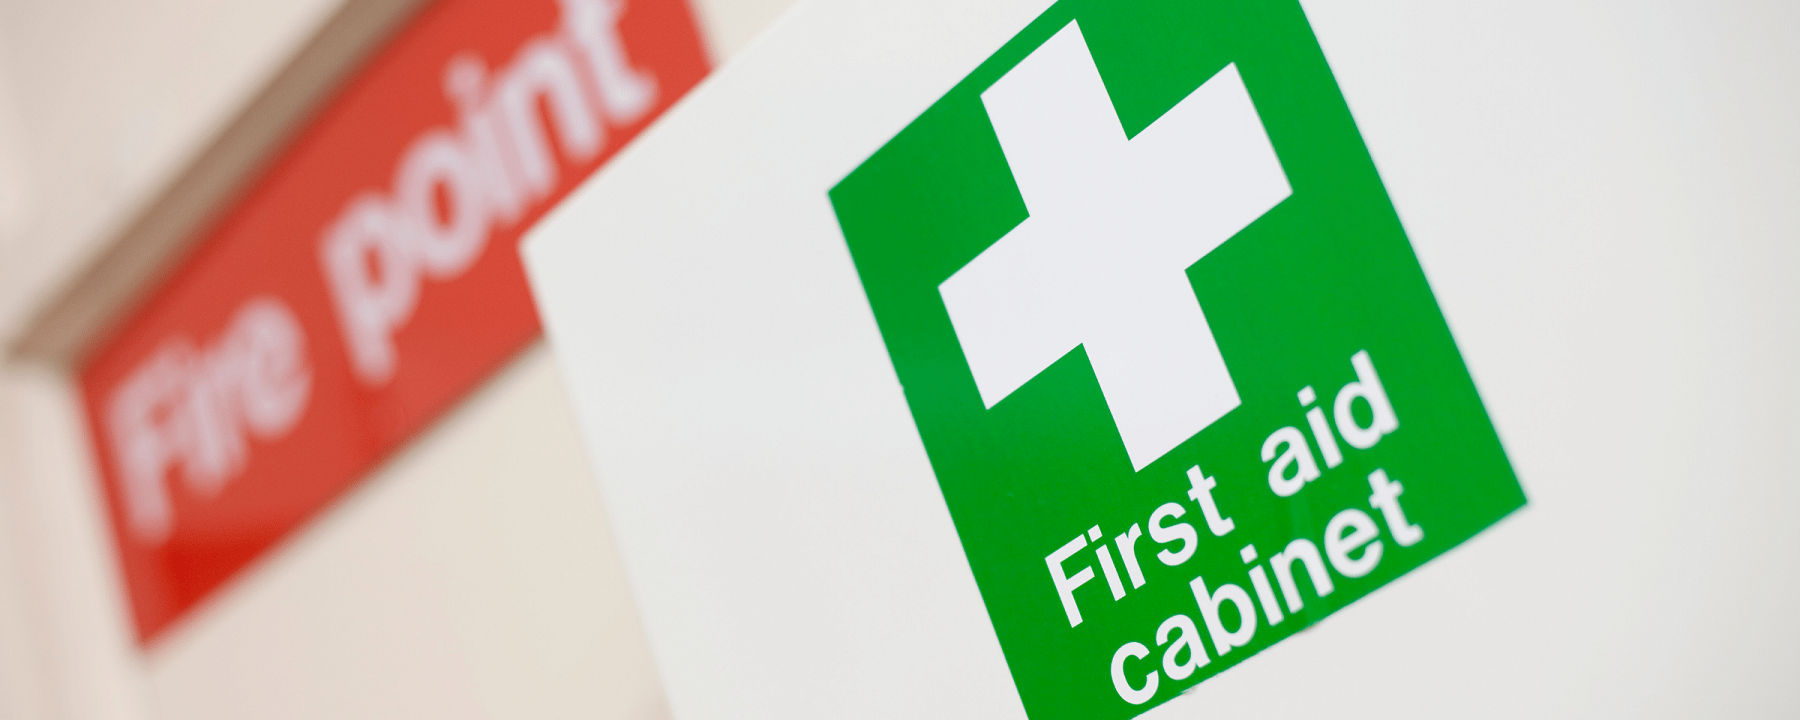 First Aid Cabinet signage